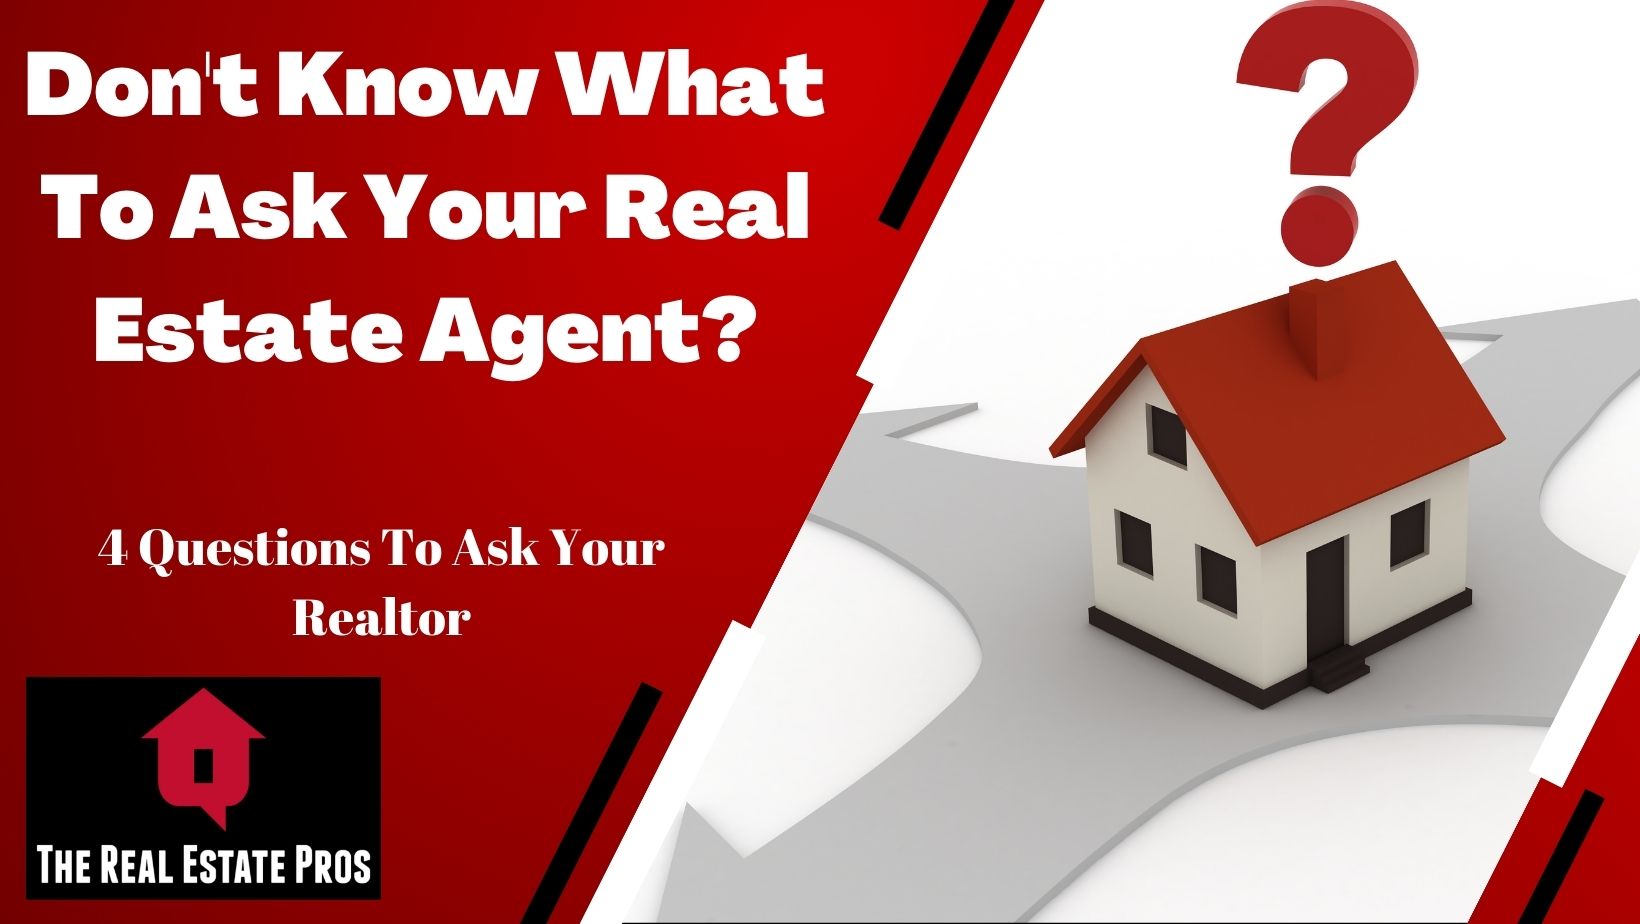 Don’t Know What To Ask Your Real Estate Agent?